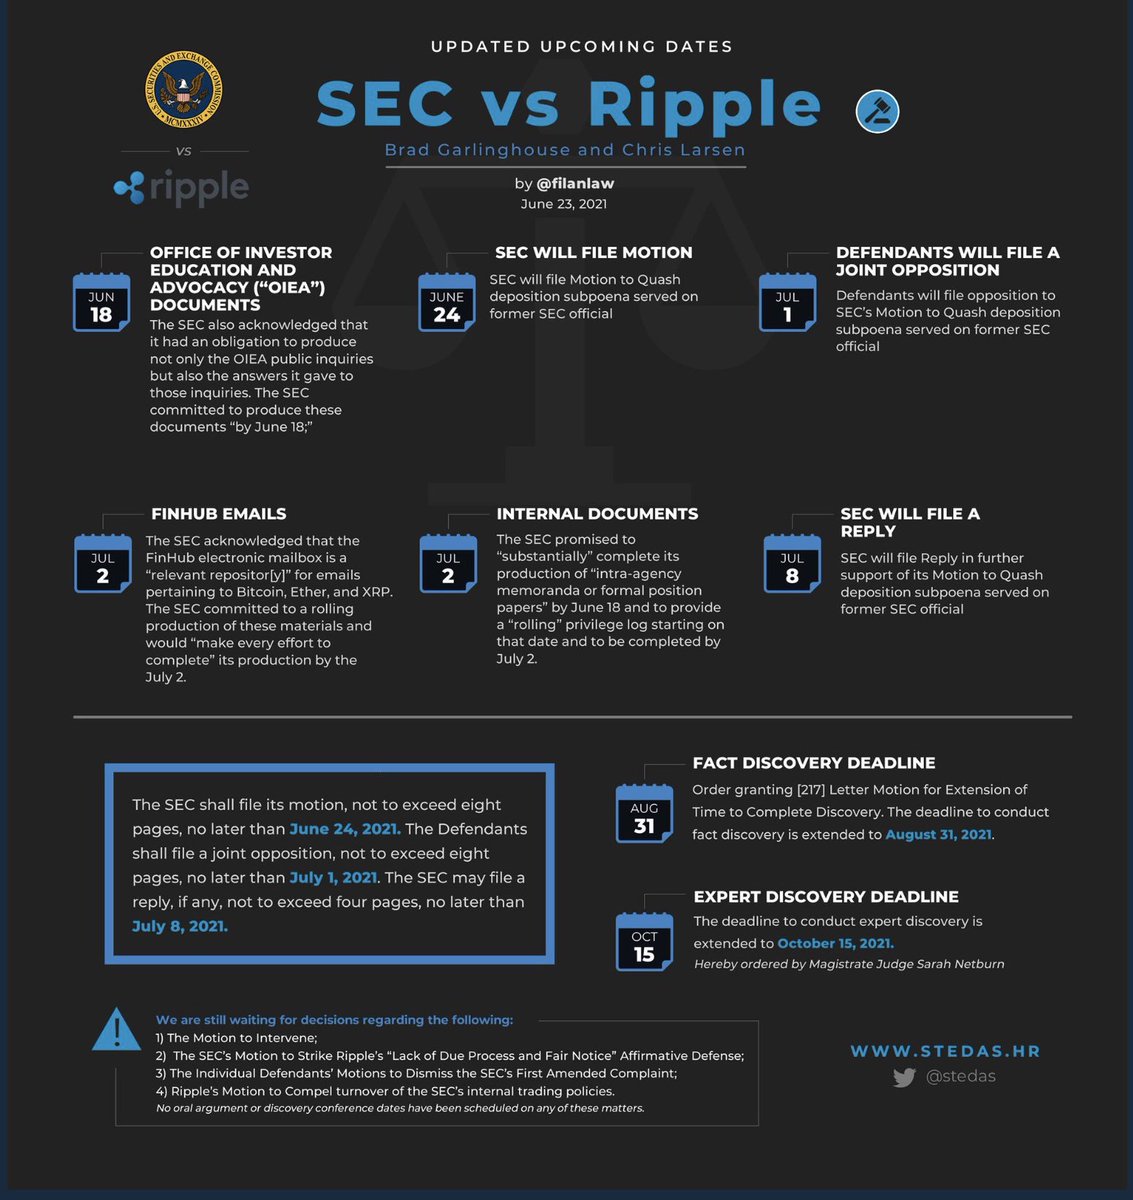 RT @FilanLaw: #XRPCommunity #SEC_NEWS v. #Ripple #XRP Updated events, graphics courtesy of @stedas.  He’s fast! https://t.co/yxigK6gUdn